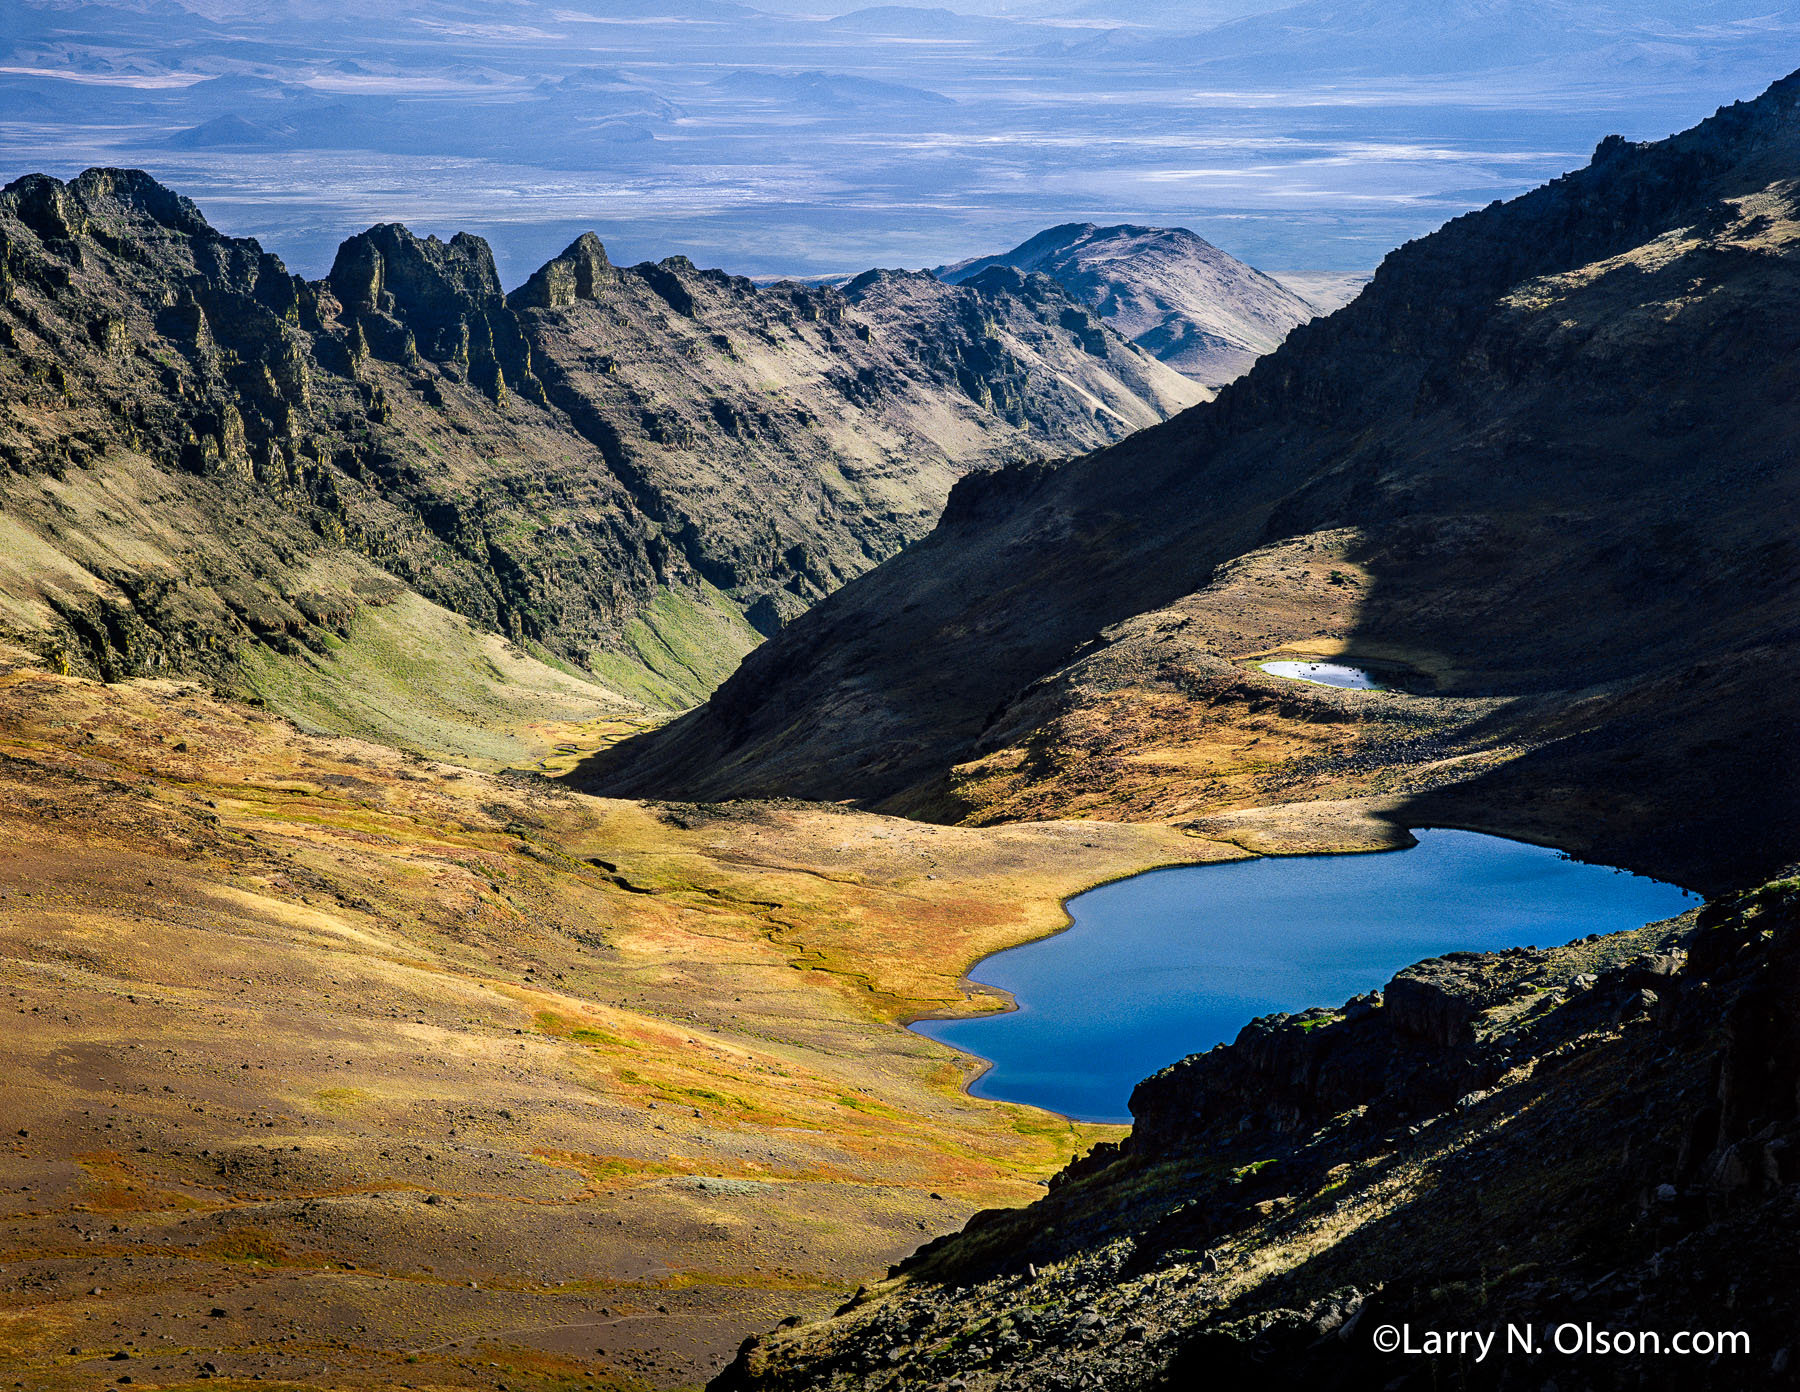 Wild Horse Lake, Steens Mountain, OR | Fall colors and afternoon light show off the volcanic and glaciated landscape.